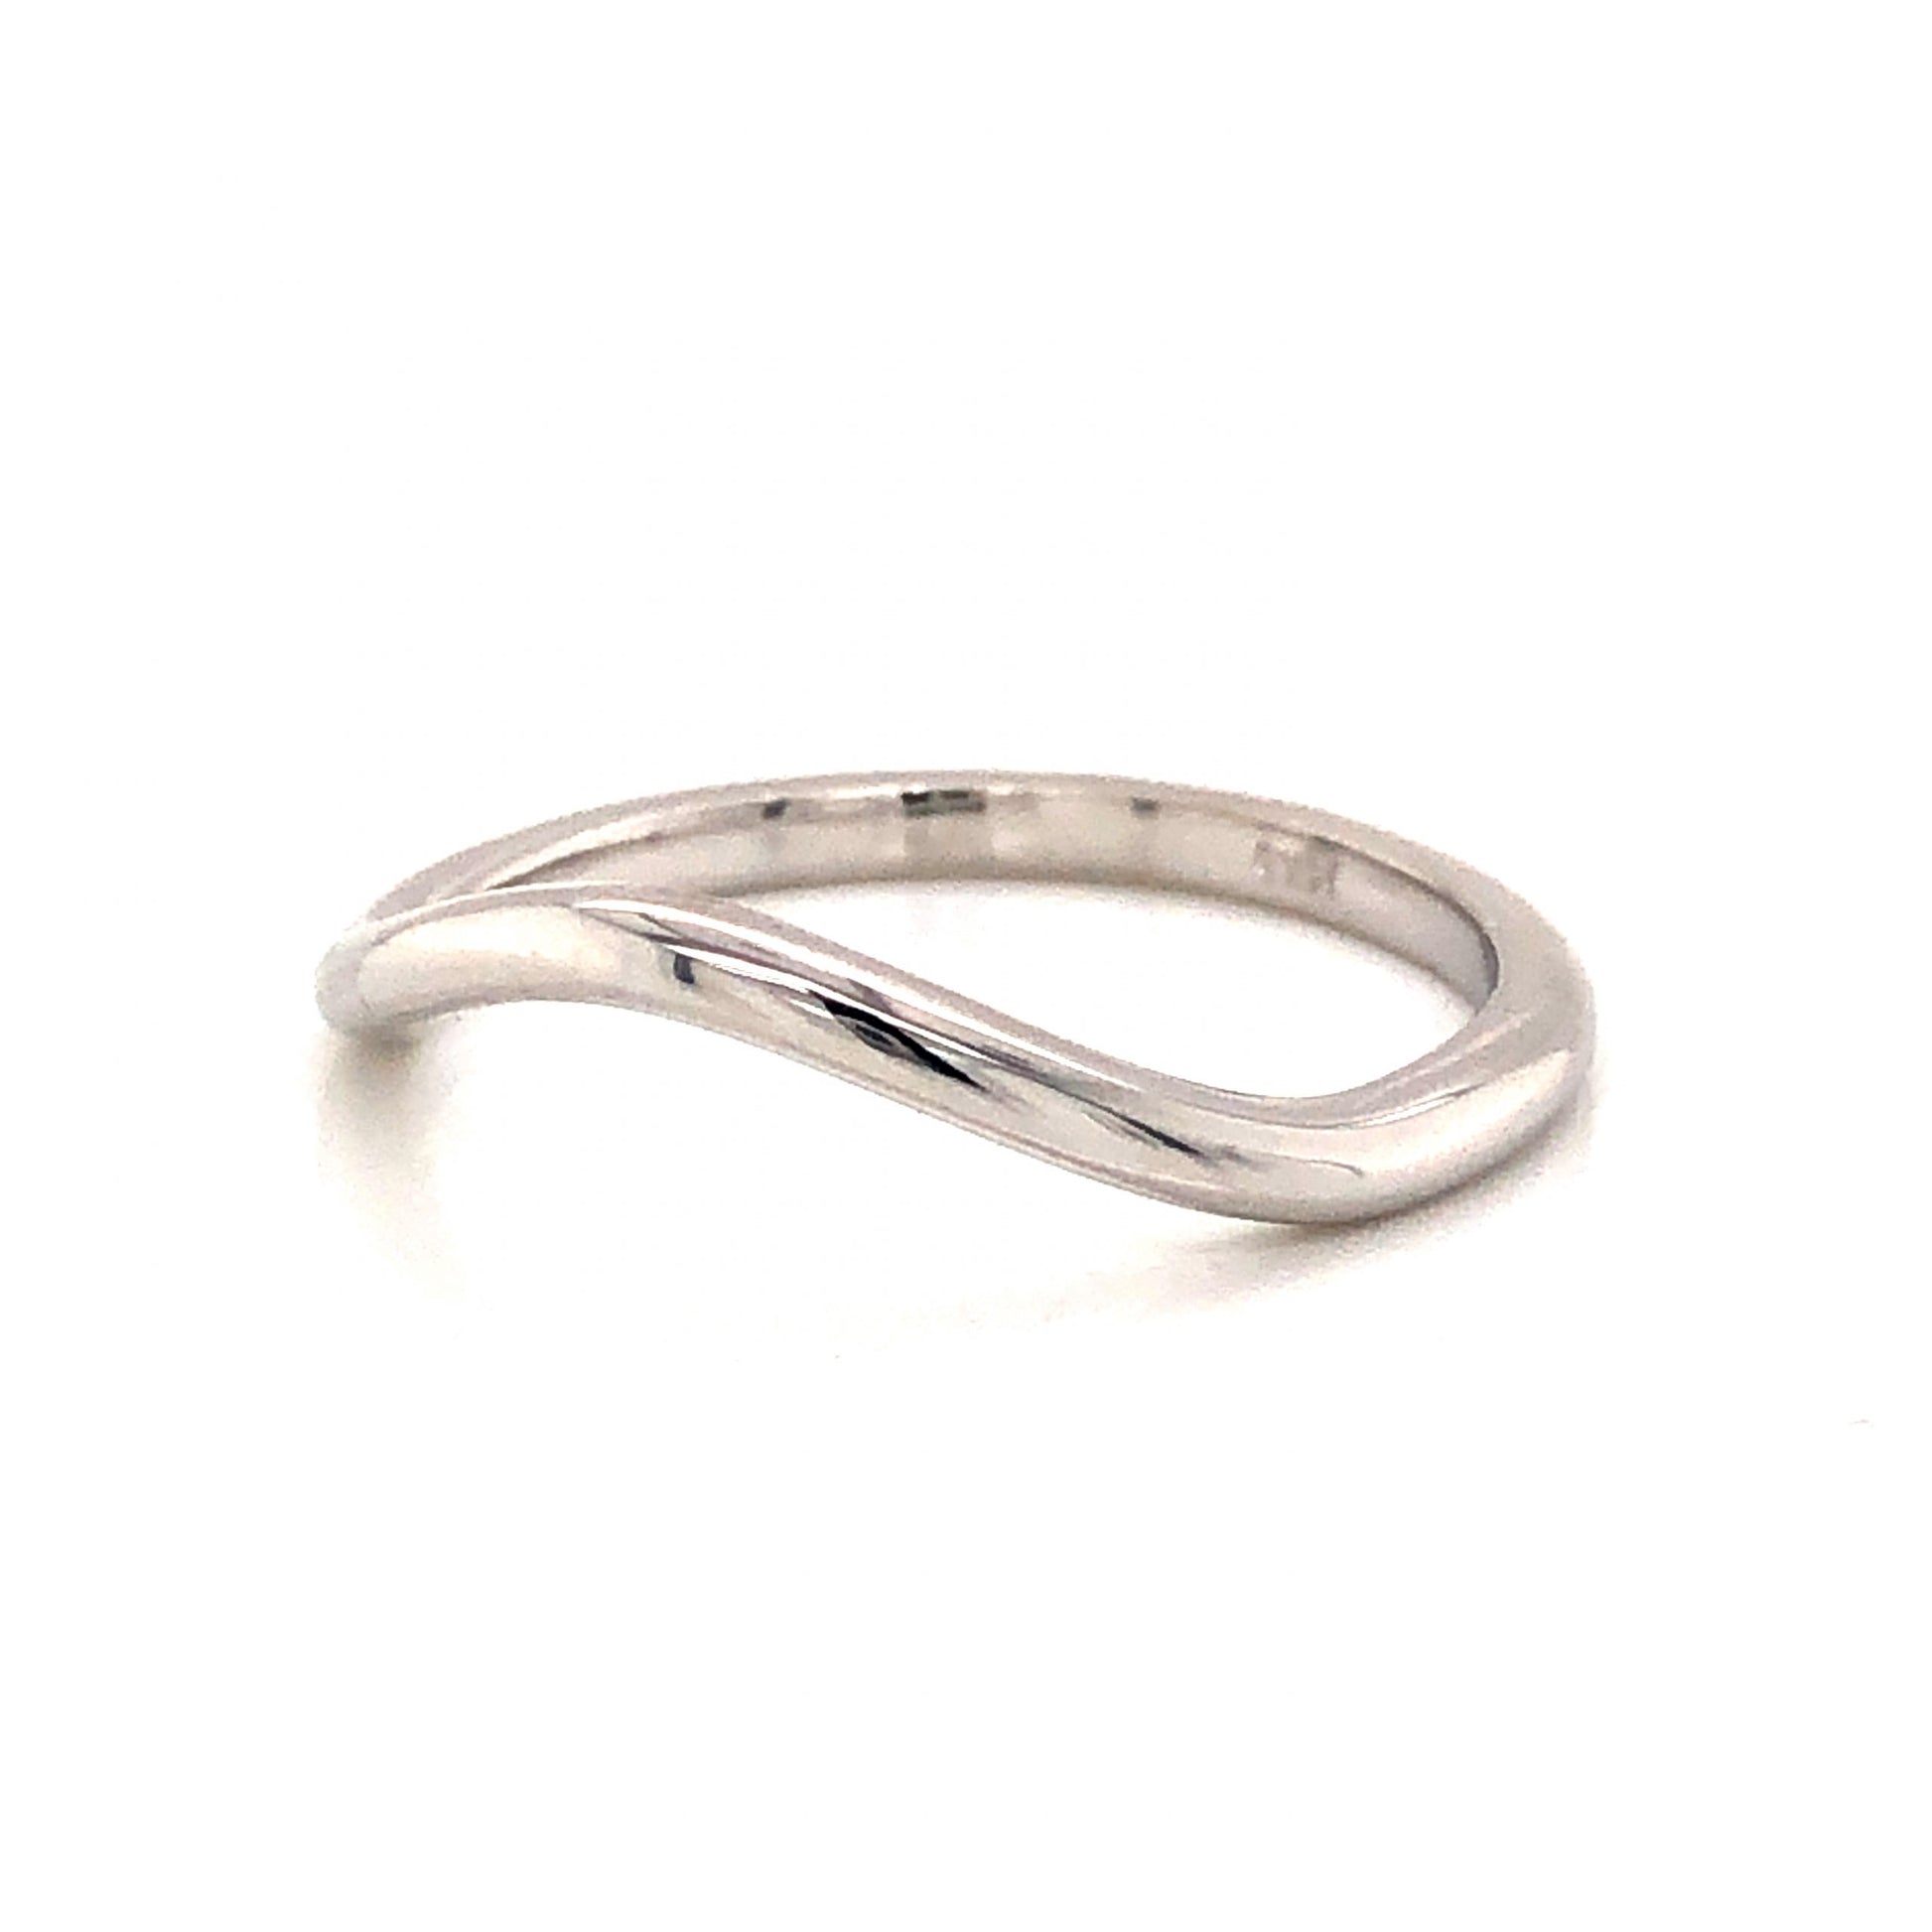 Thin Round Curved Wedding Band in 14k White GoldComposition: 14 Karat White GoldRing Size: 7Total Gram Weight: 2.2 gInscription: 14k